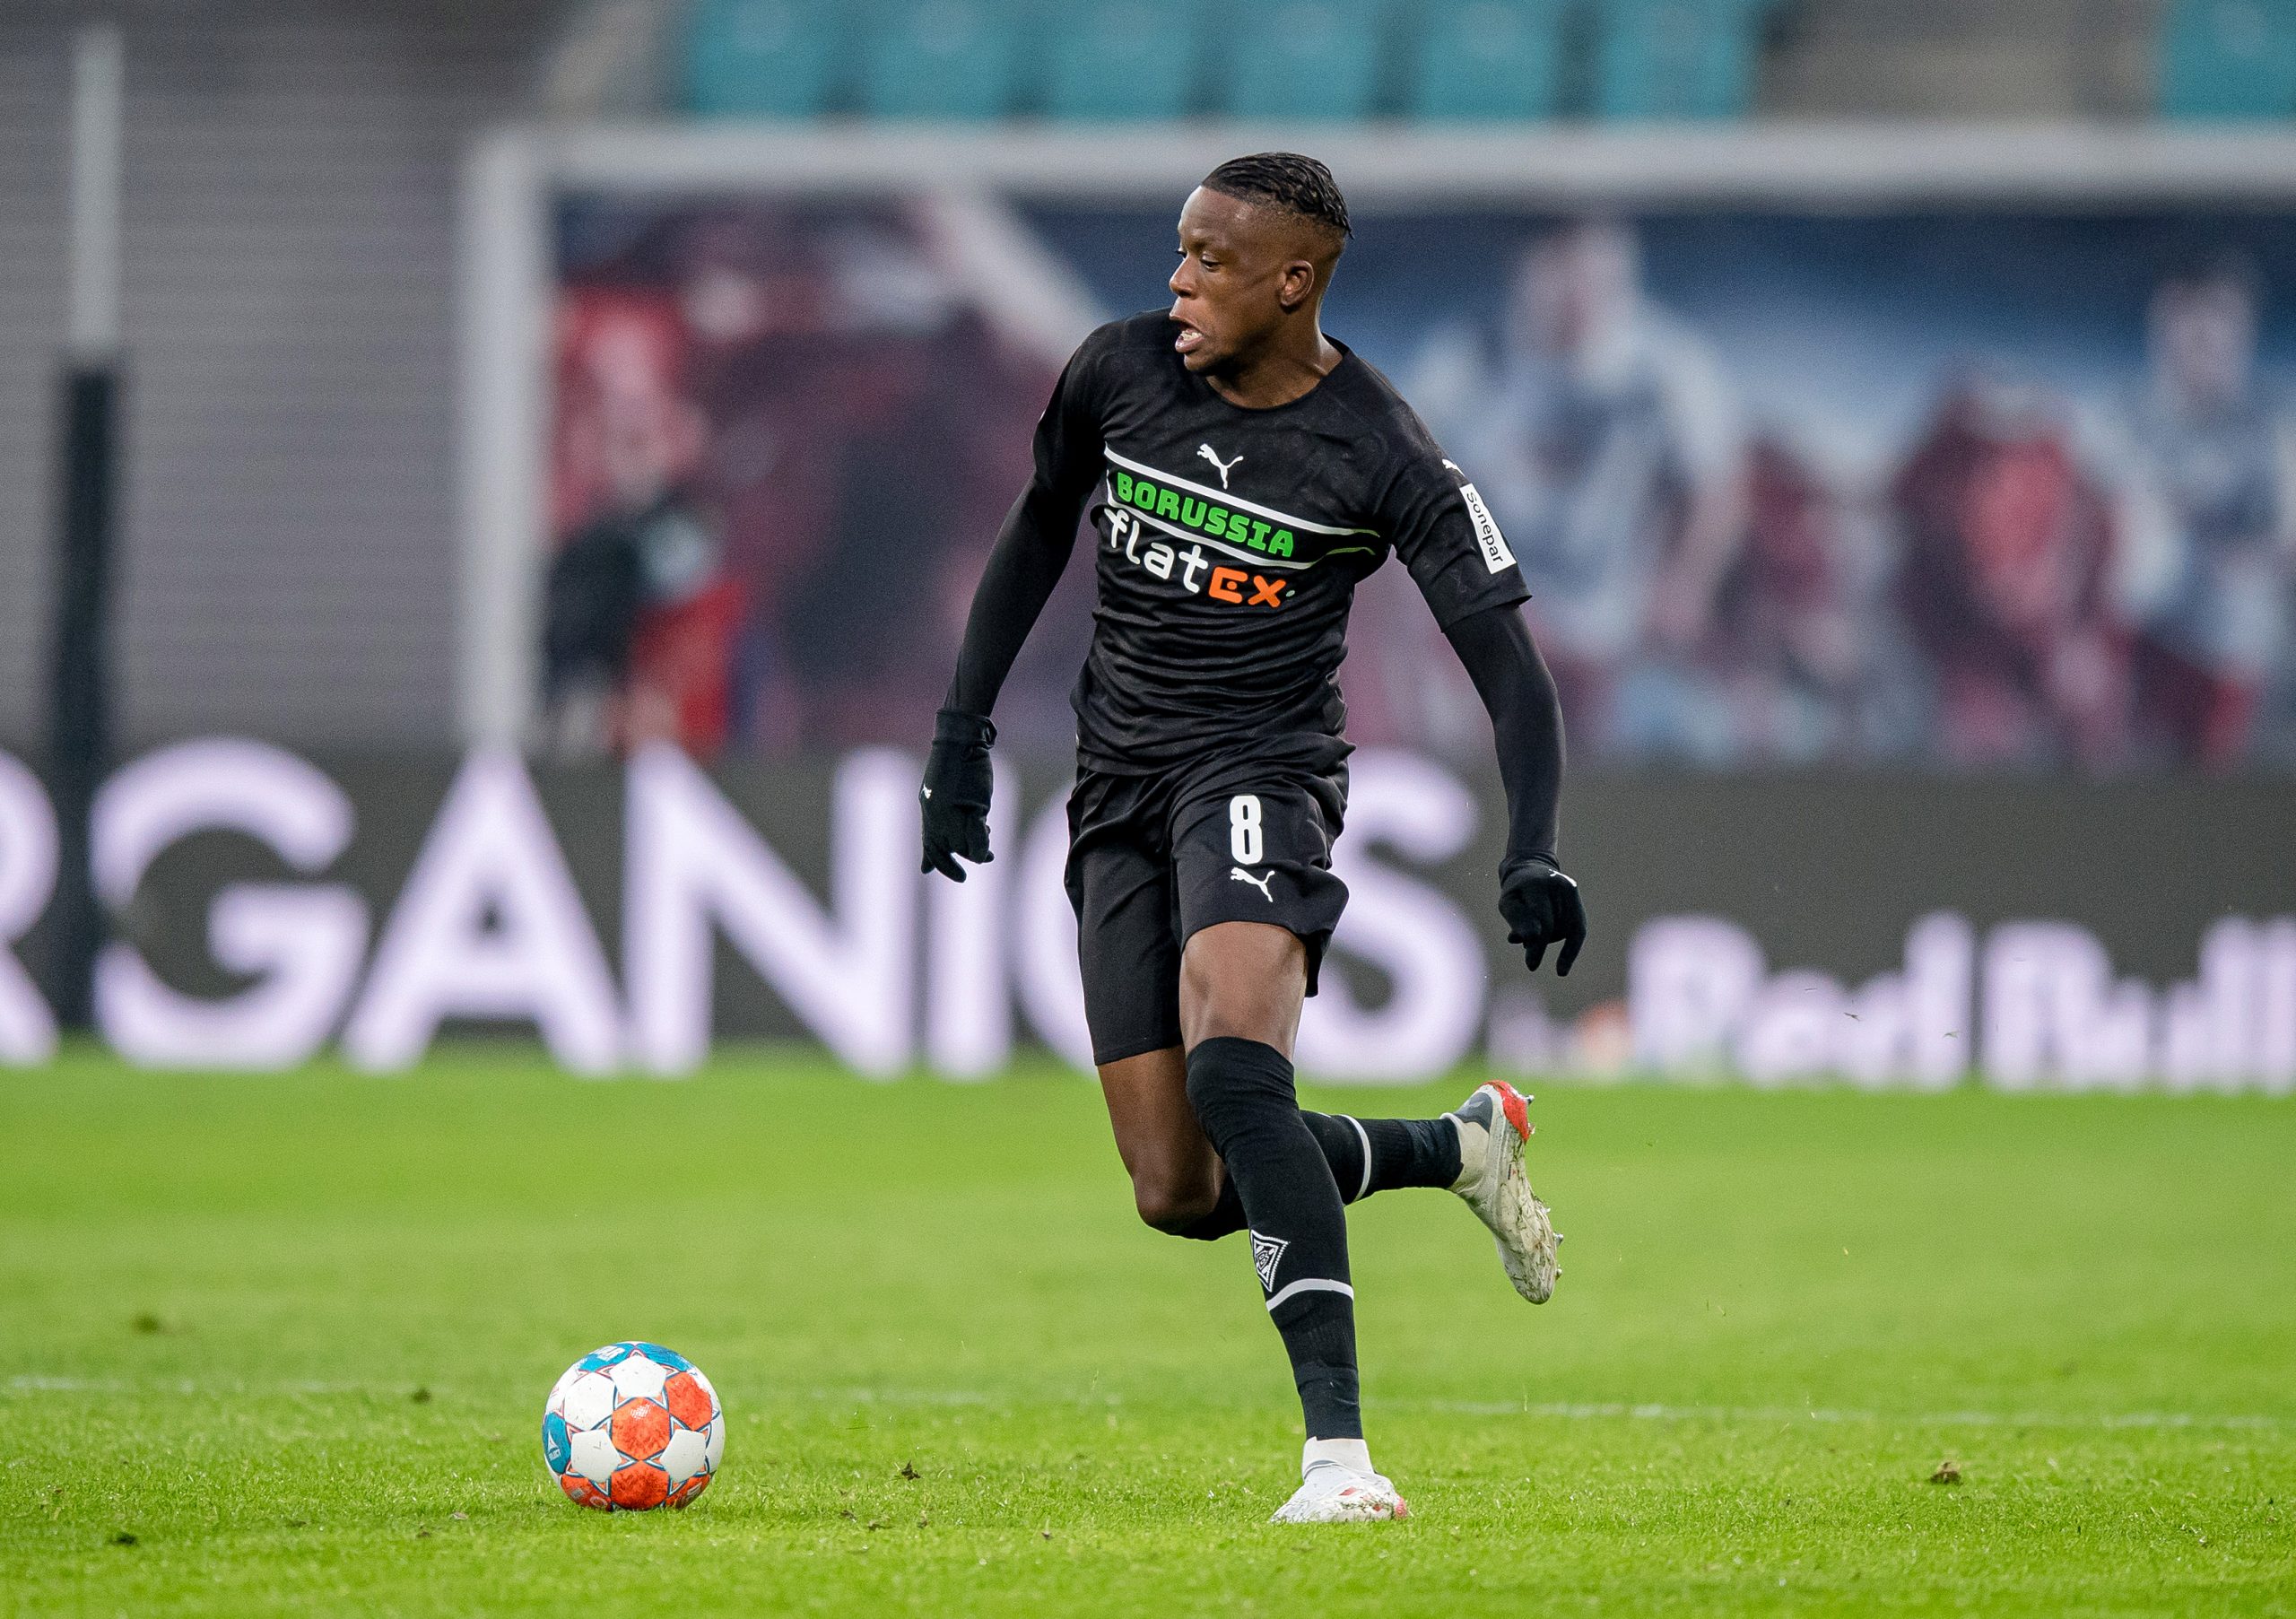 LEIPZIG, GERMANY - DECEMBER 11: Denis Zakaria of Mönchengladbach in action during the Bundesliga match between RB Leipzig and Borussia Mönchengladbach at Red Bull Arena on December 11, 2021 in Leipzig, Germany. (Photo by Thomas Eisenhuth/Getty Images)The 4th Official uses images provided by the following image agency:
Getty Images (https://www.gettyimages.de/)
Imago Images (https://www.imago-images.de/)